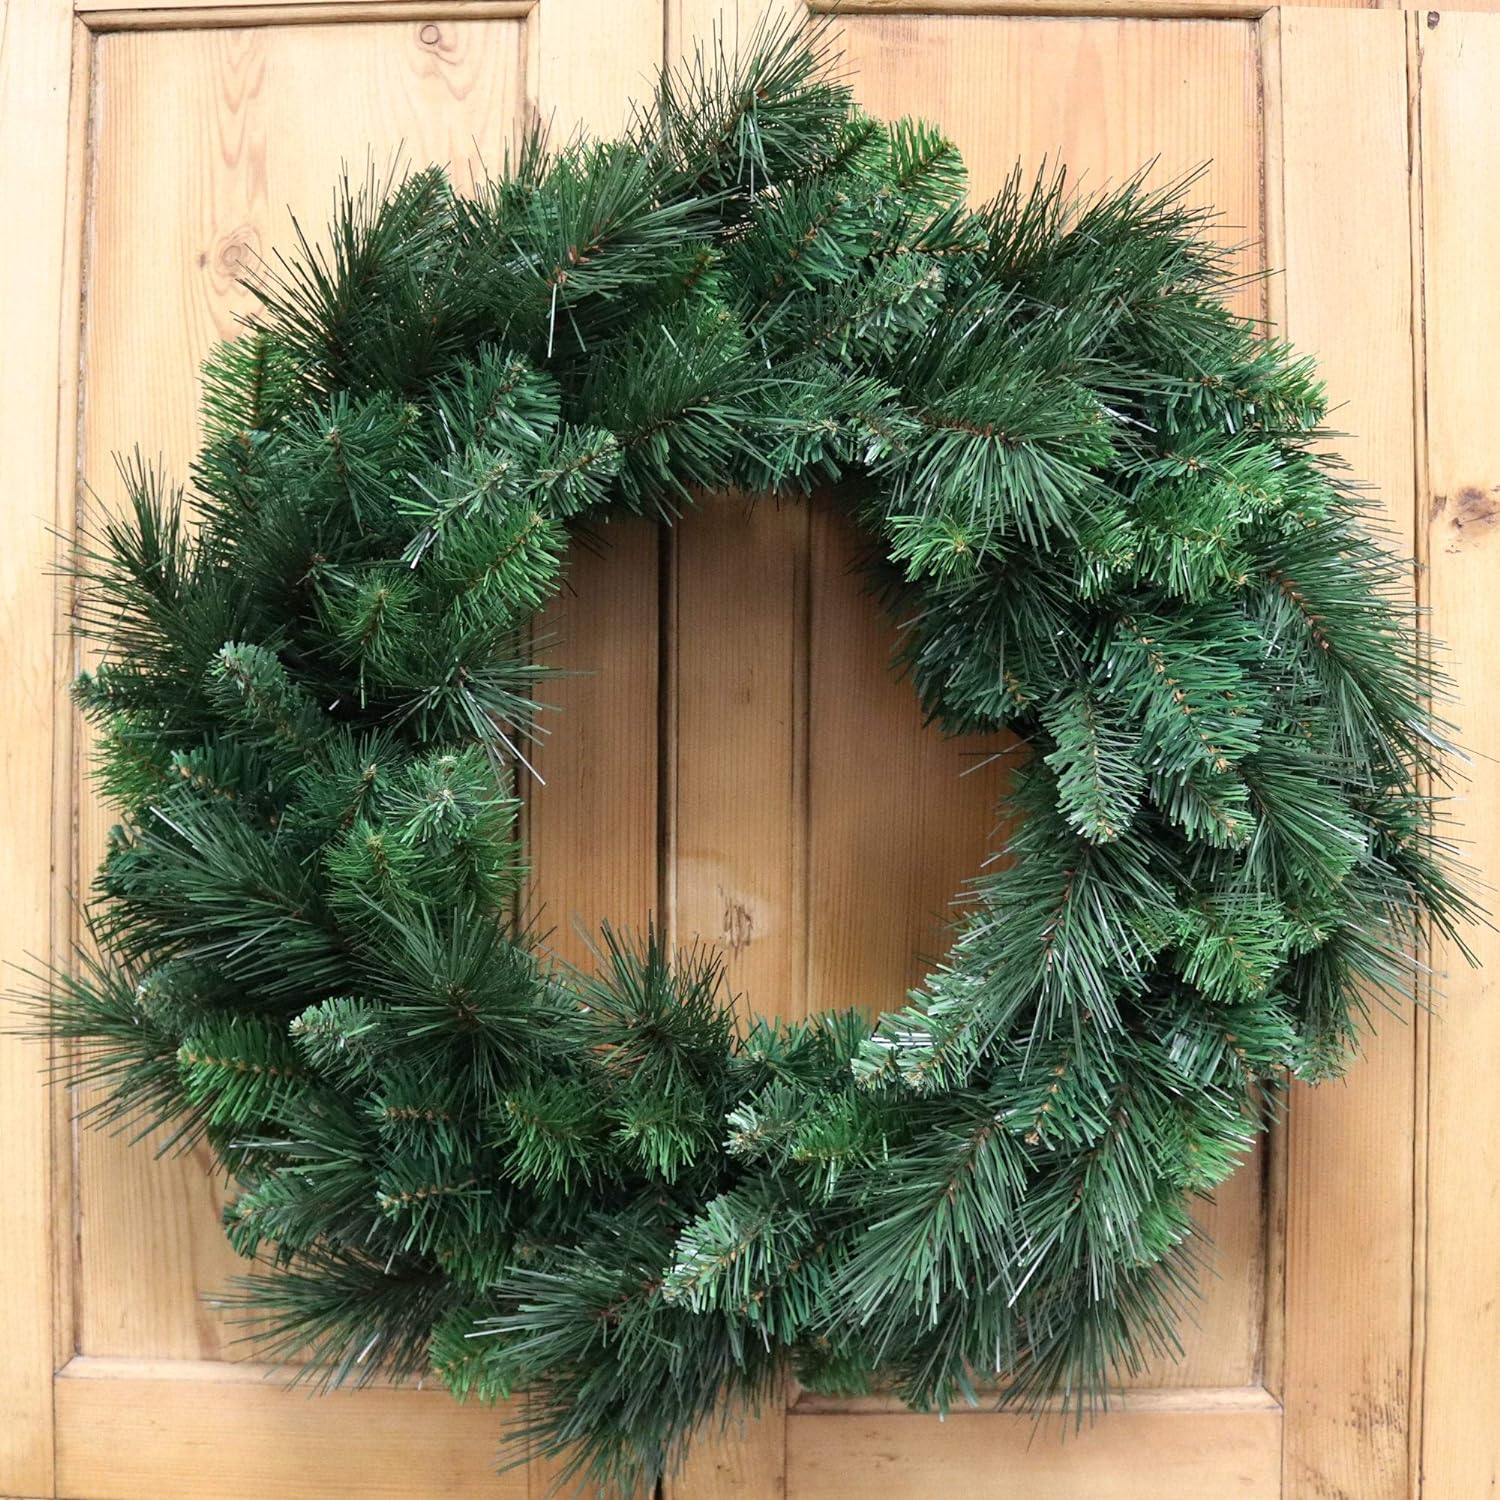 Deluxe Evergreen Pine Wreath with 150 Lifelike Green Tips | 24" Wide | Indoor/Outdoor Use | Holiday Xmas Accents | Front Door | Christmas Wreaths | Home & Office Decor (Set of 2)